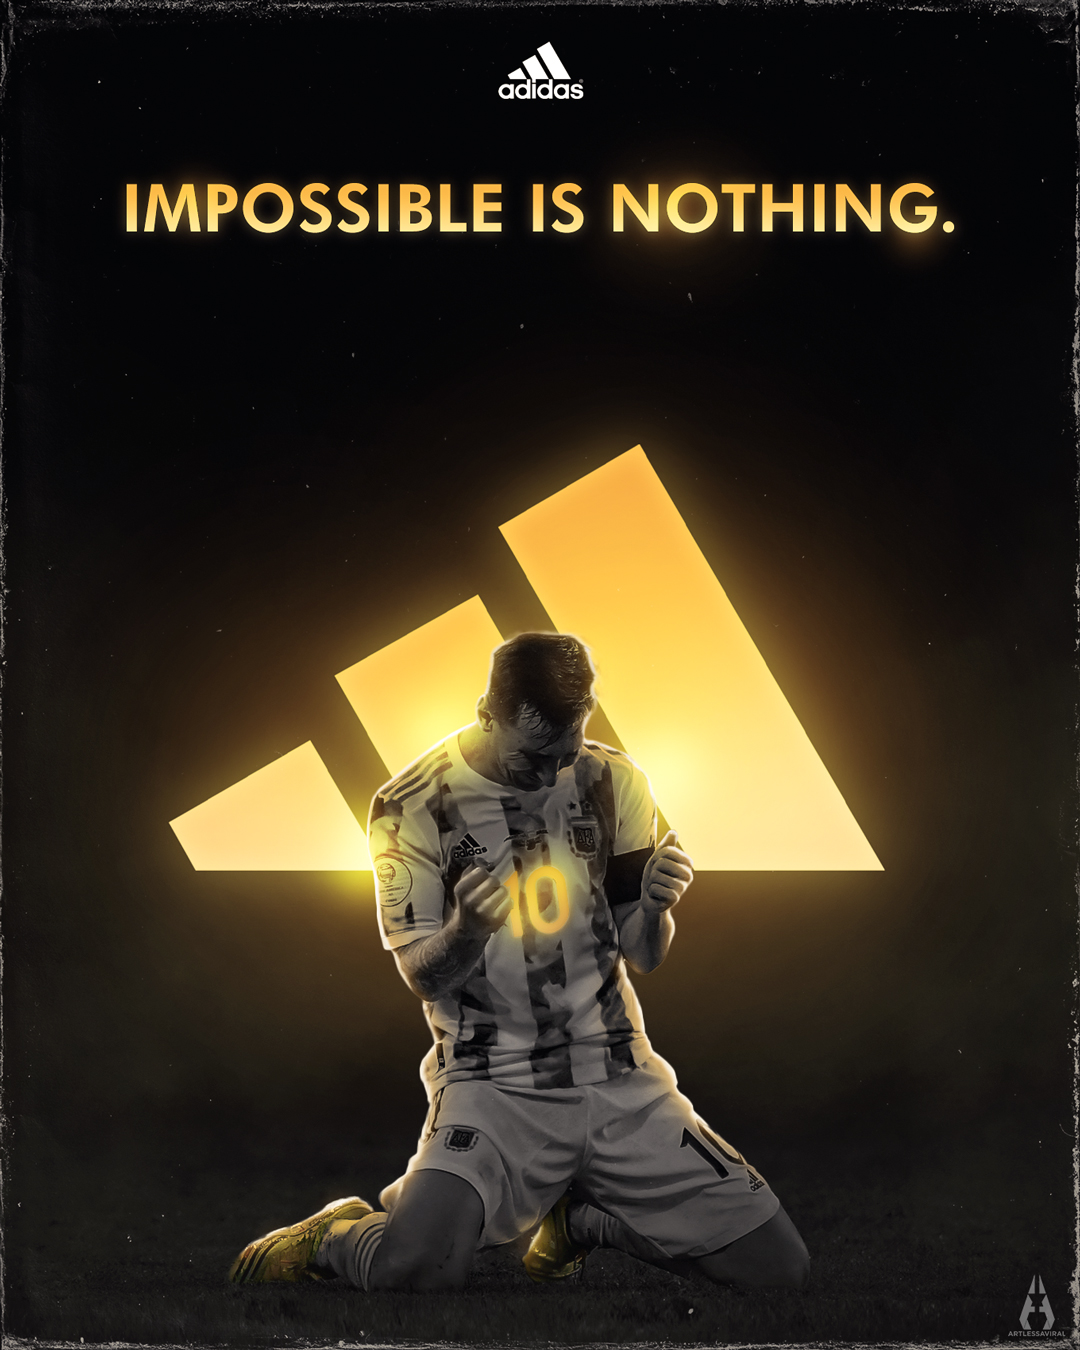 MESSI X ADIDAS | Impossible Is Nothing by ArtlessAviral on DeviantArt